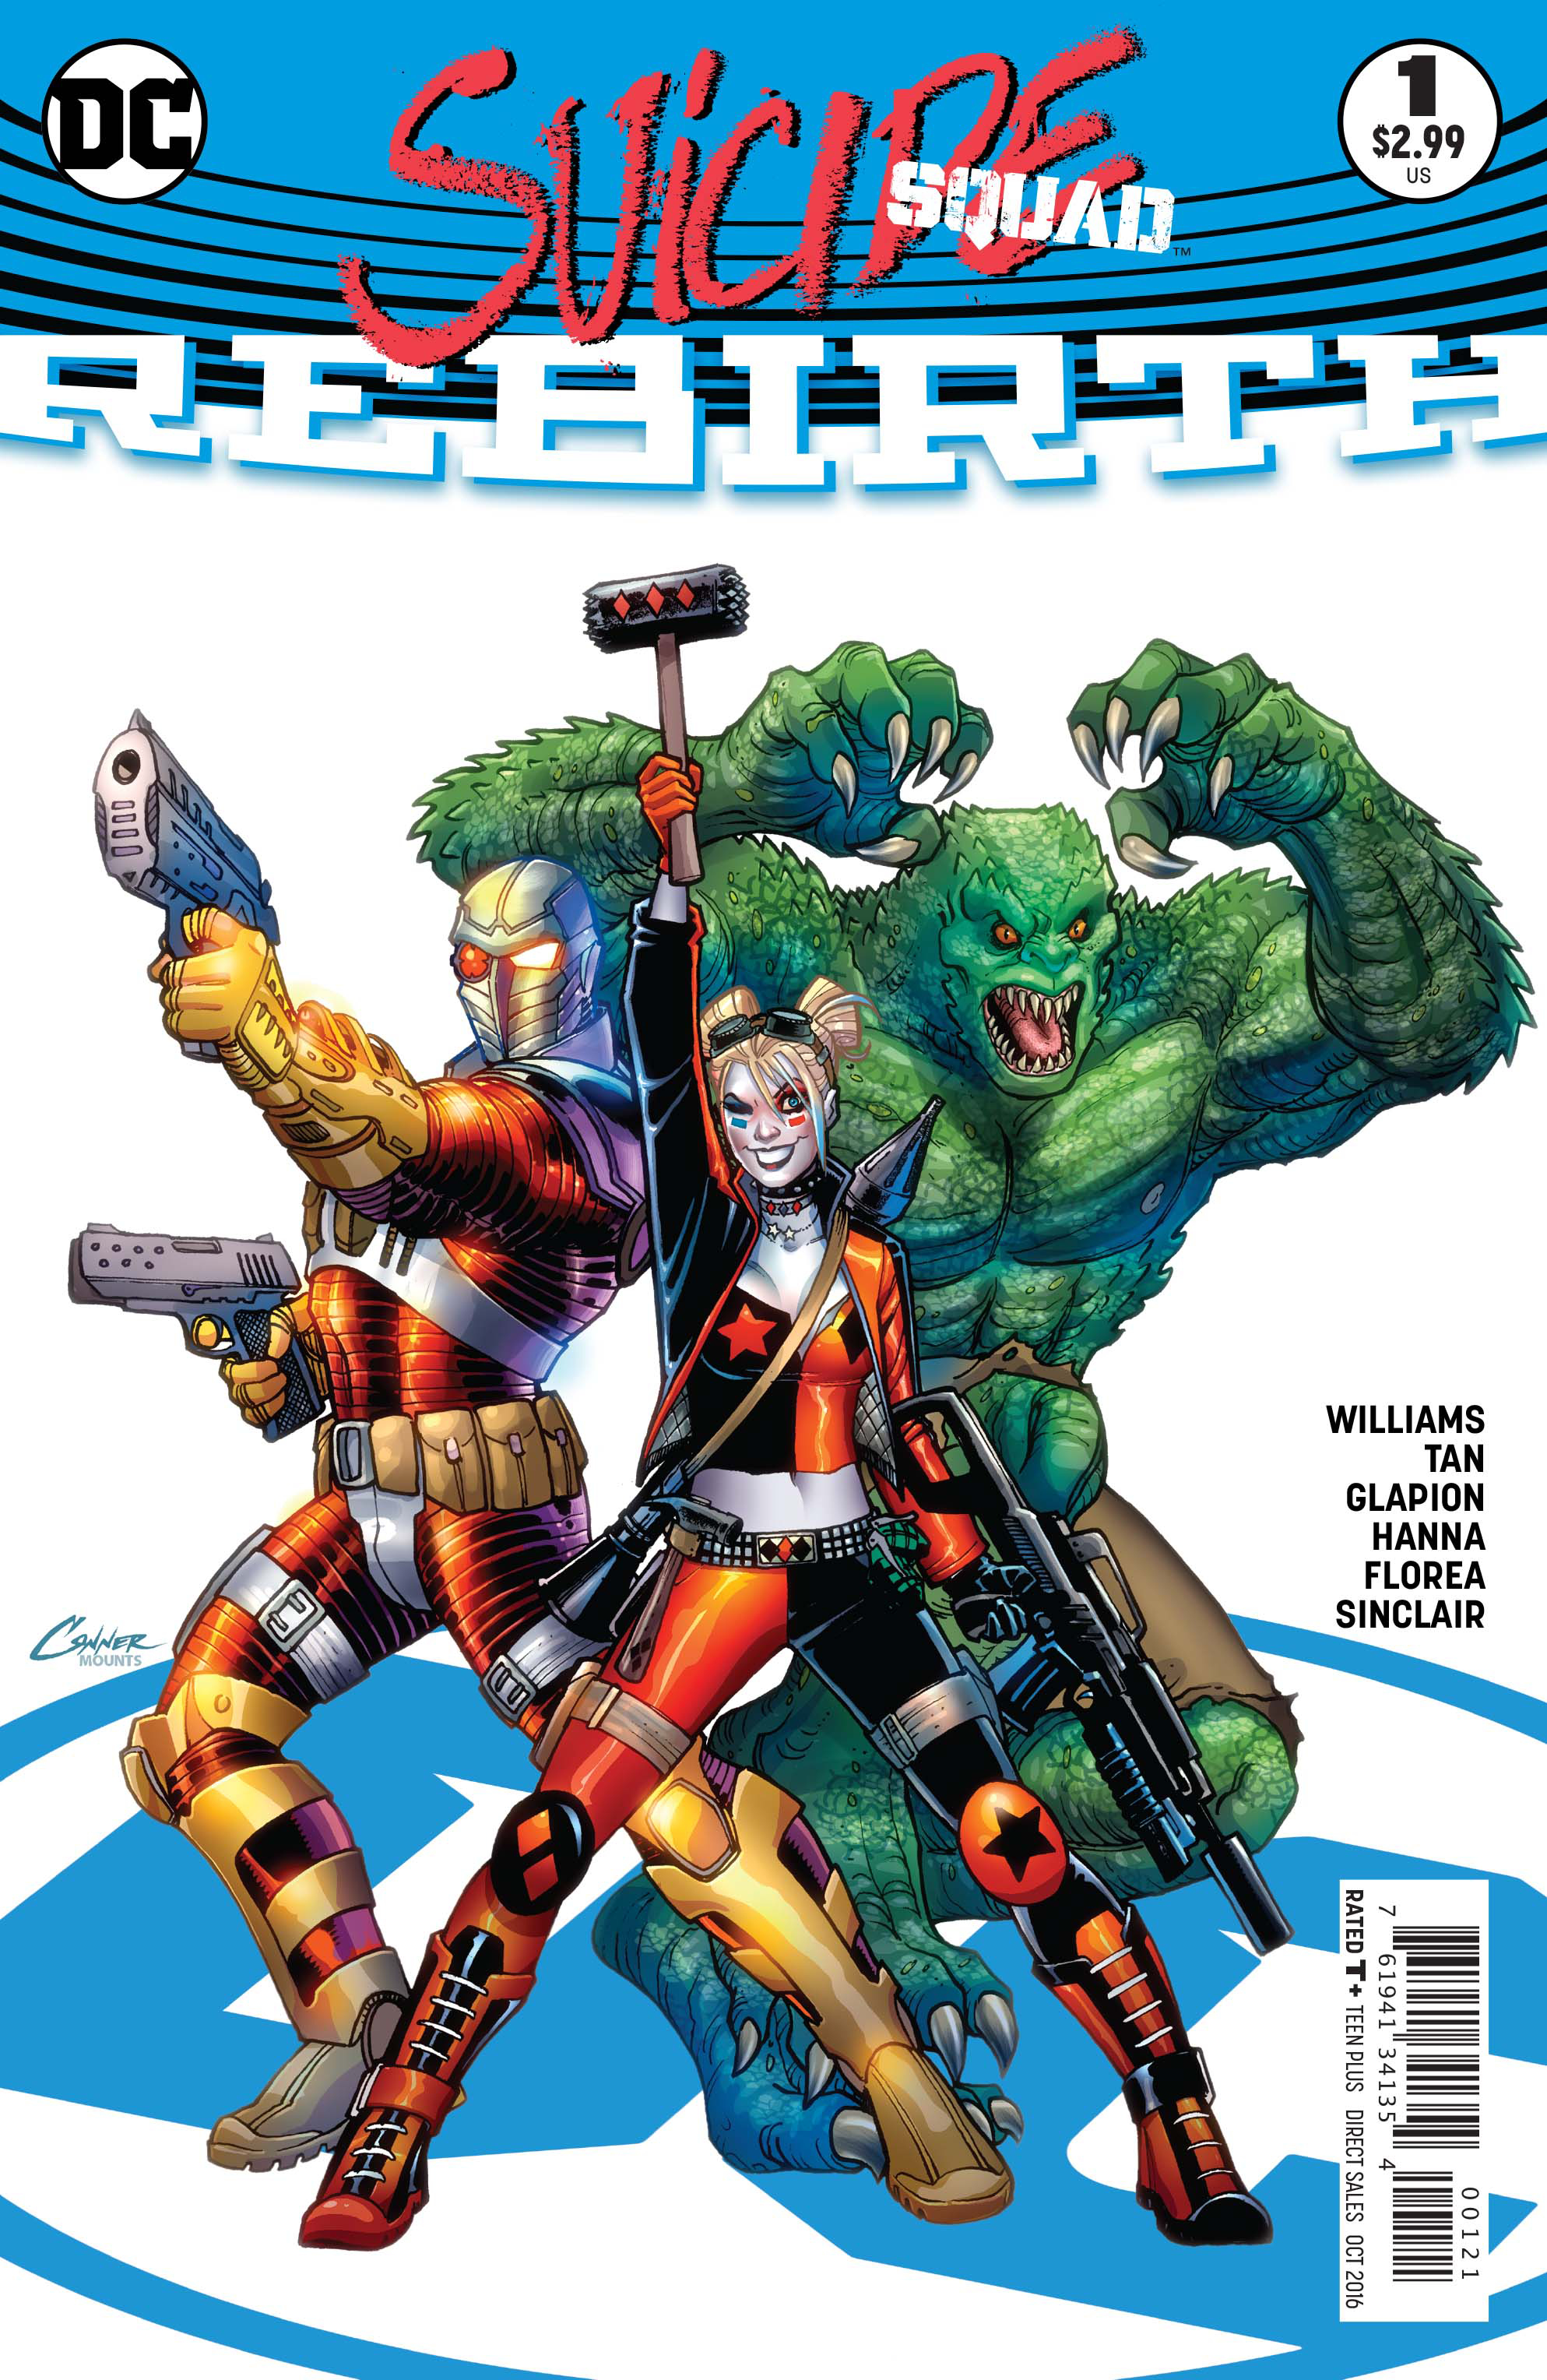 OCT190477 - SUICIDE SQUAD #1 CARD STOCK VAR ED - Previews World